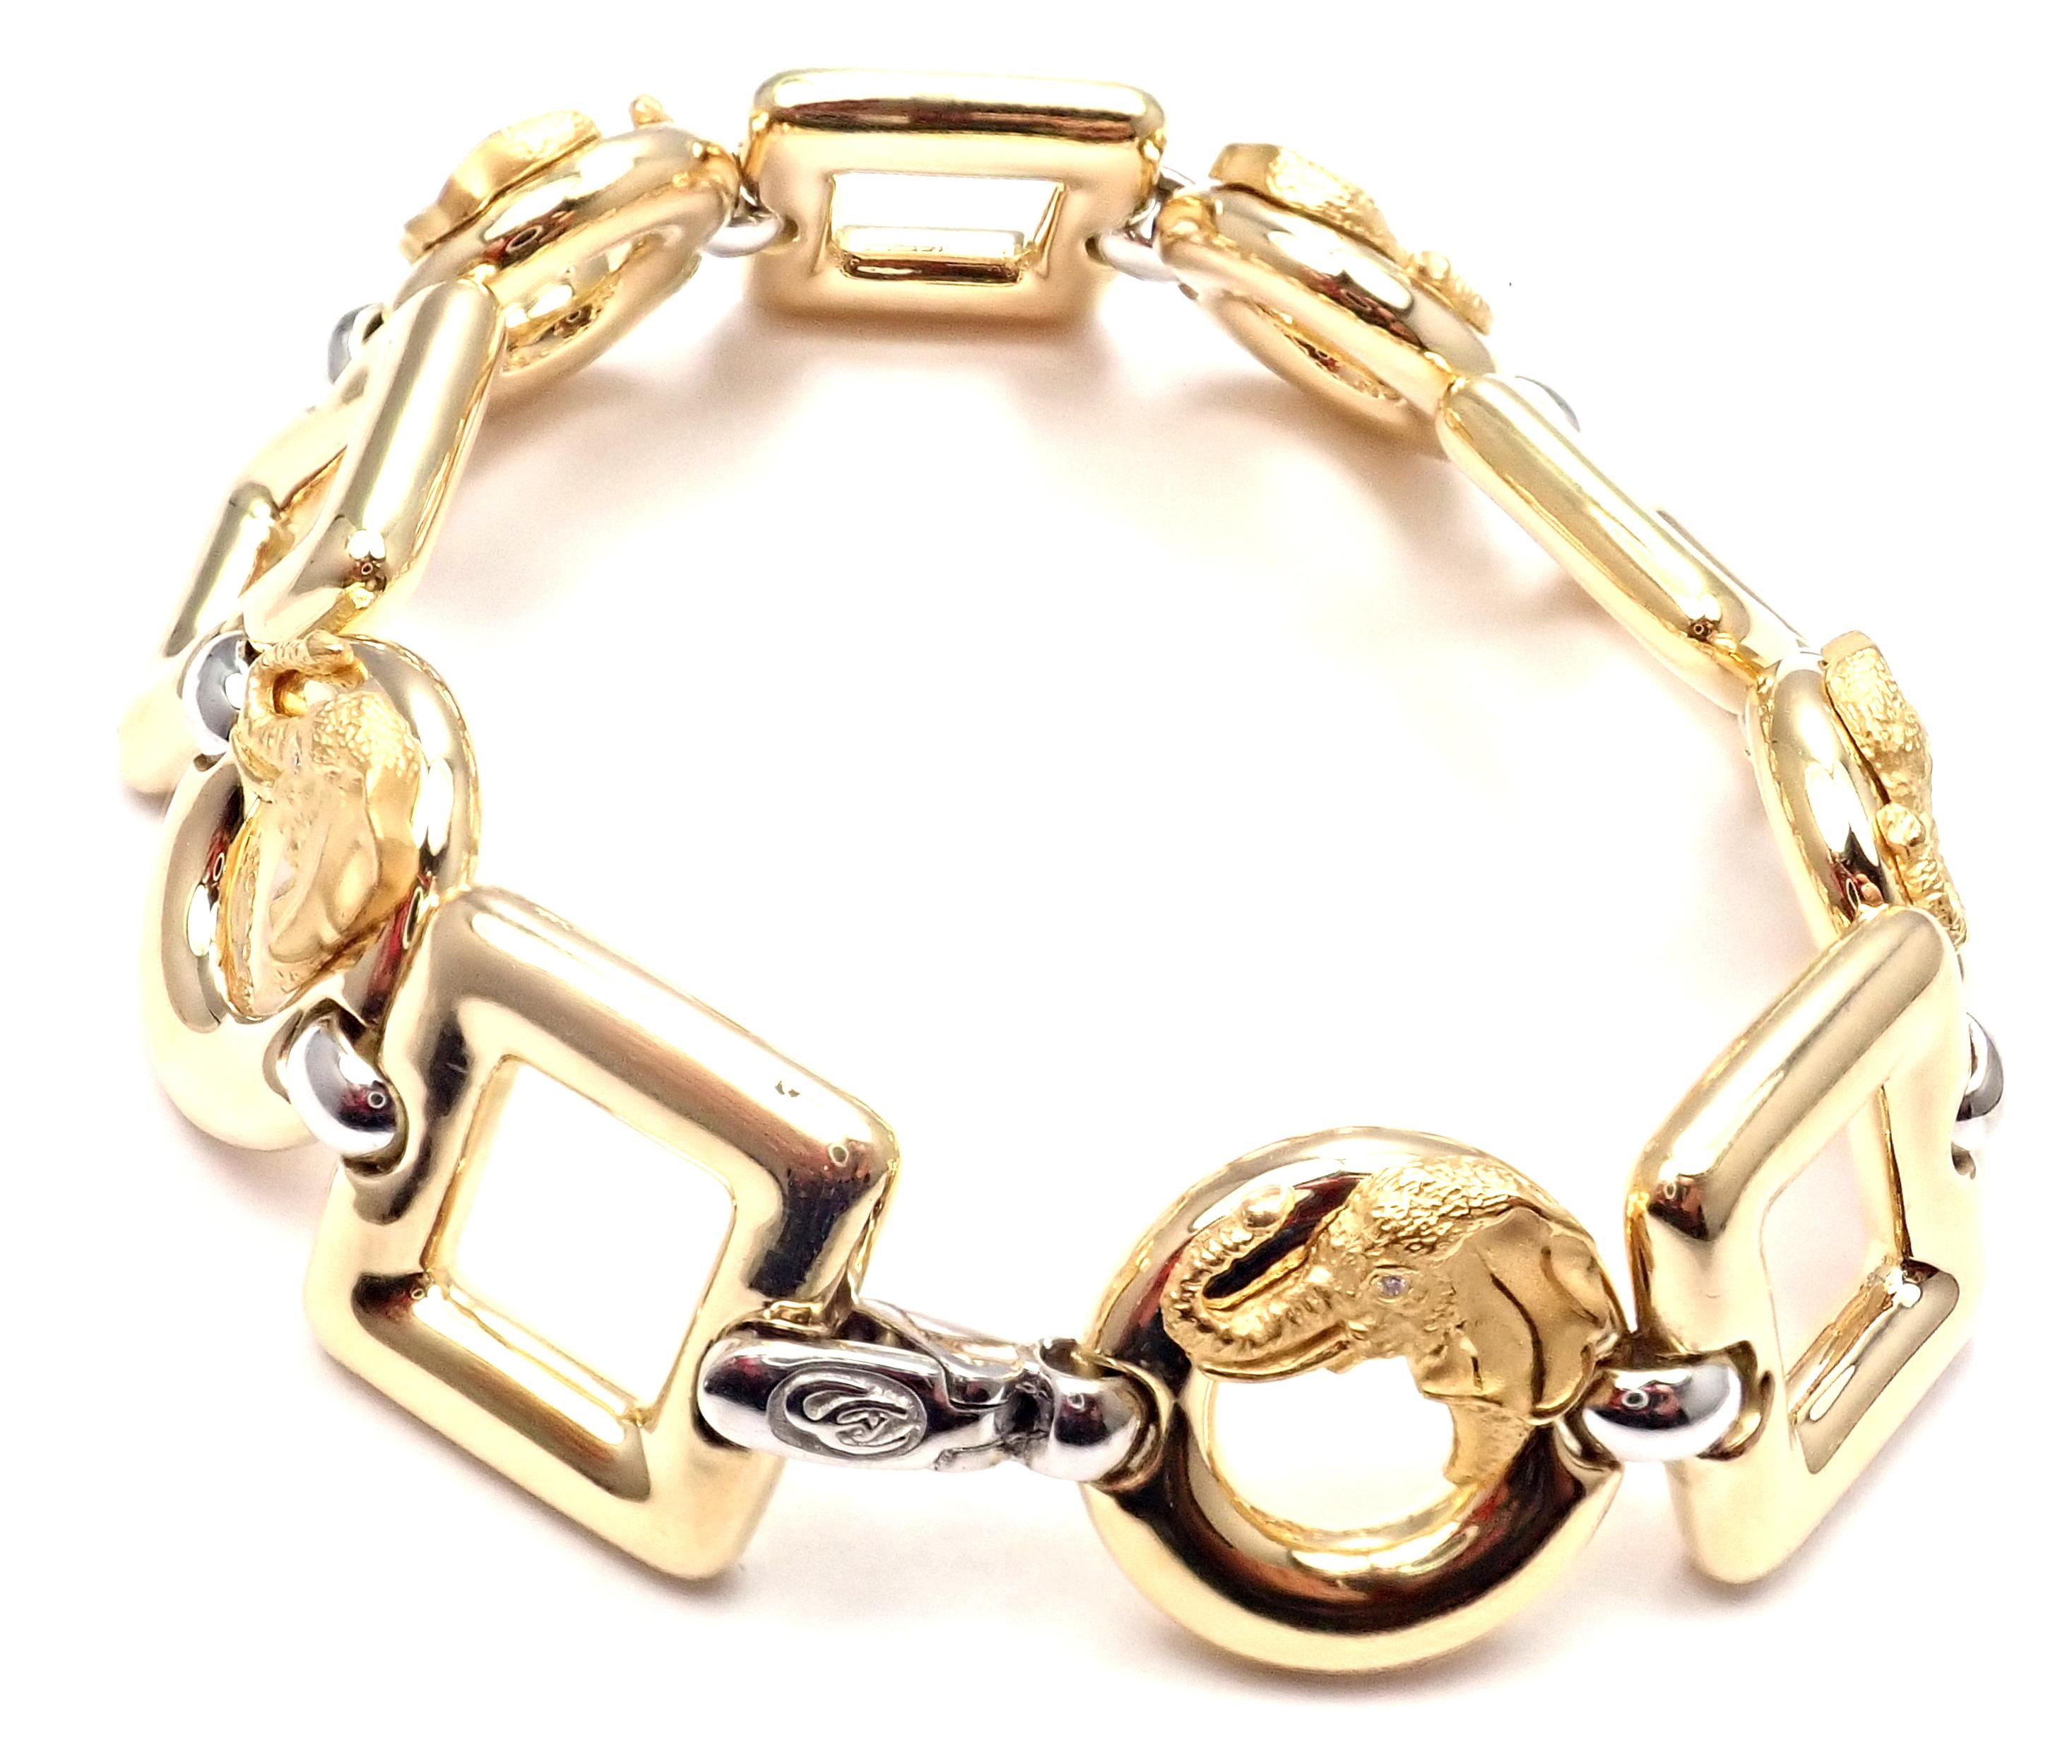 Brilliant Cut Carrera Y Carrera Diamond Elephant Yellow and White Gold Link Bracelet For Sale